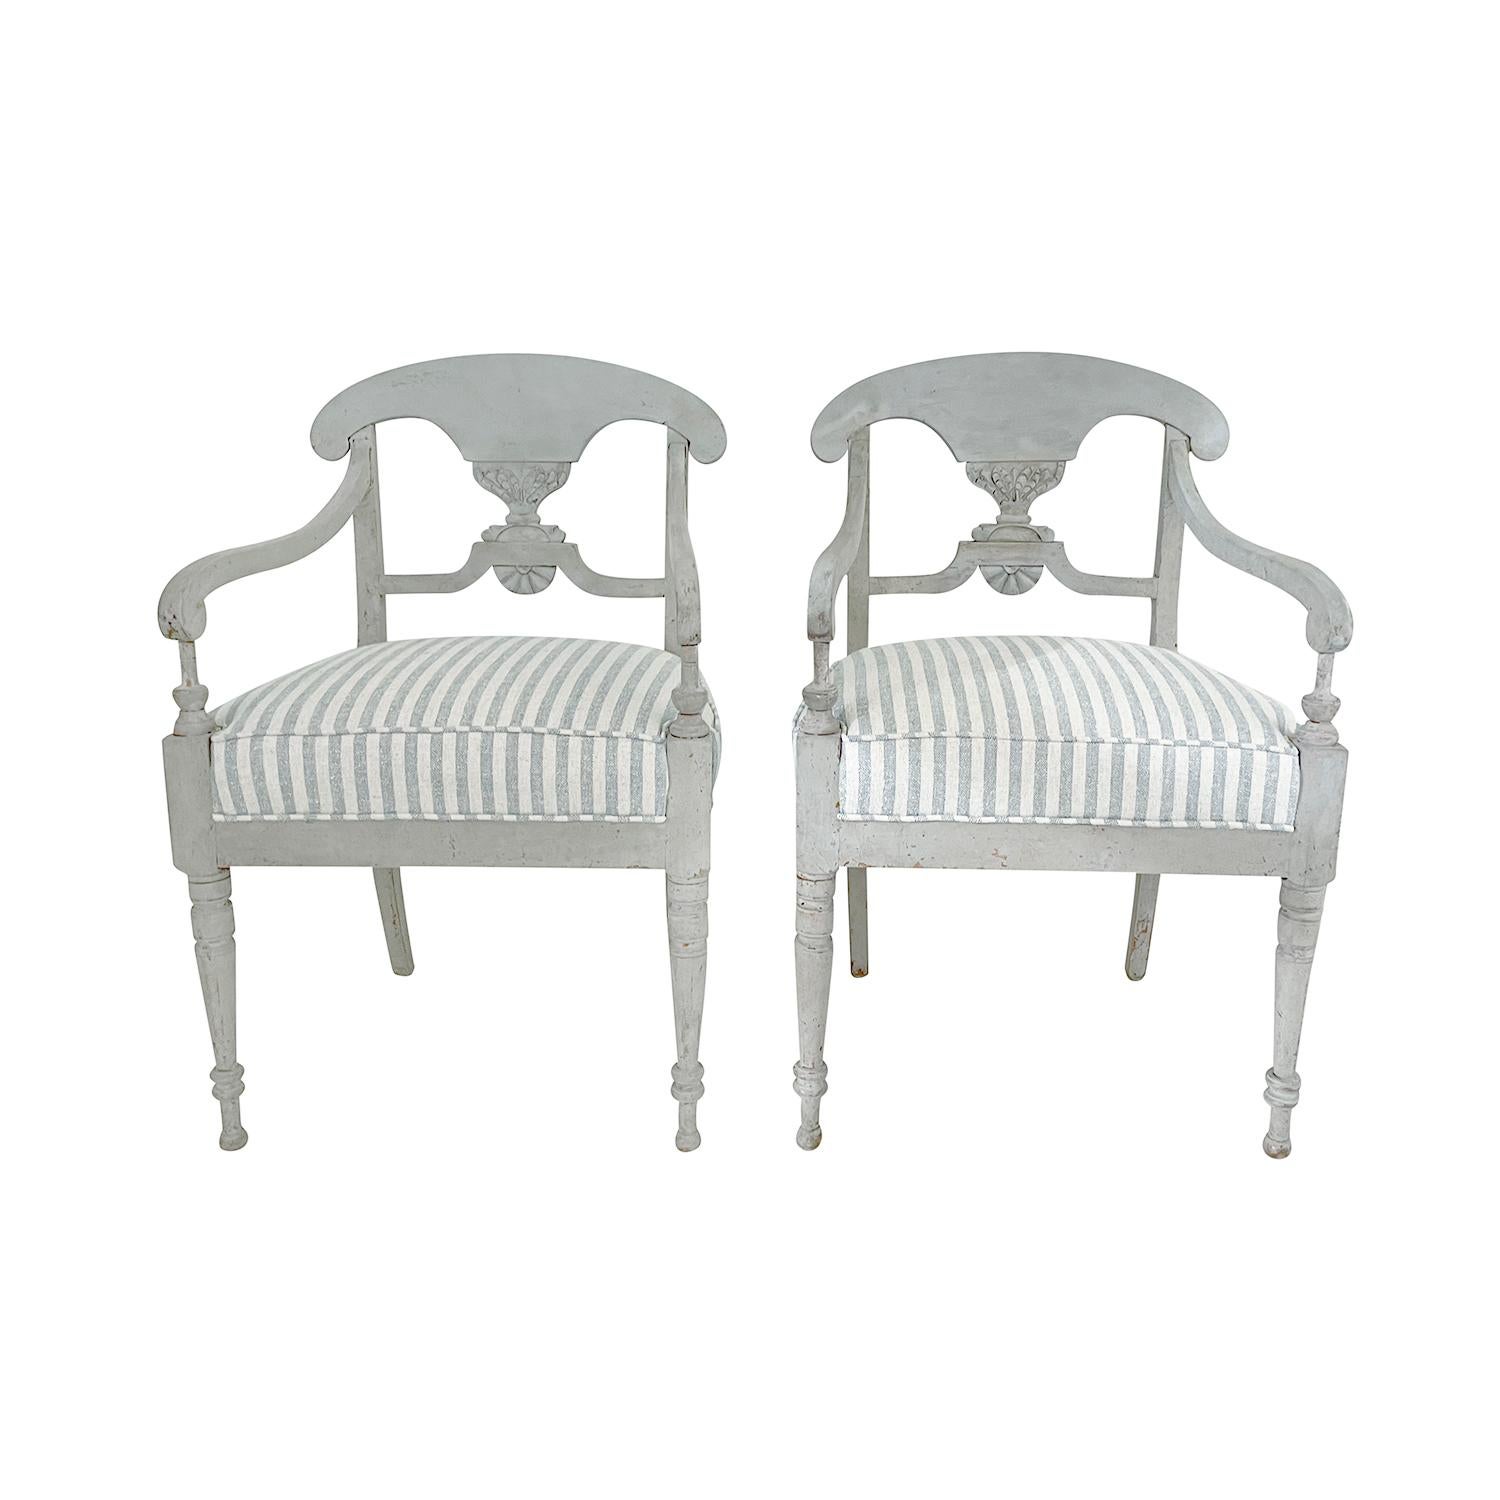 A light-grey, antique Swedish Gustavian pair of armchairs made of hand crafted painted Pinewood, in good condition. The Scandinavian side chairs have an open, arched backrest, standing on four particularized legs, detailed in the Neoclassical Greek